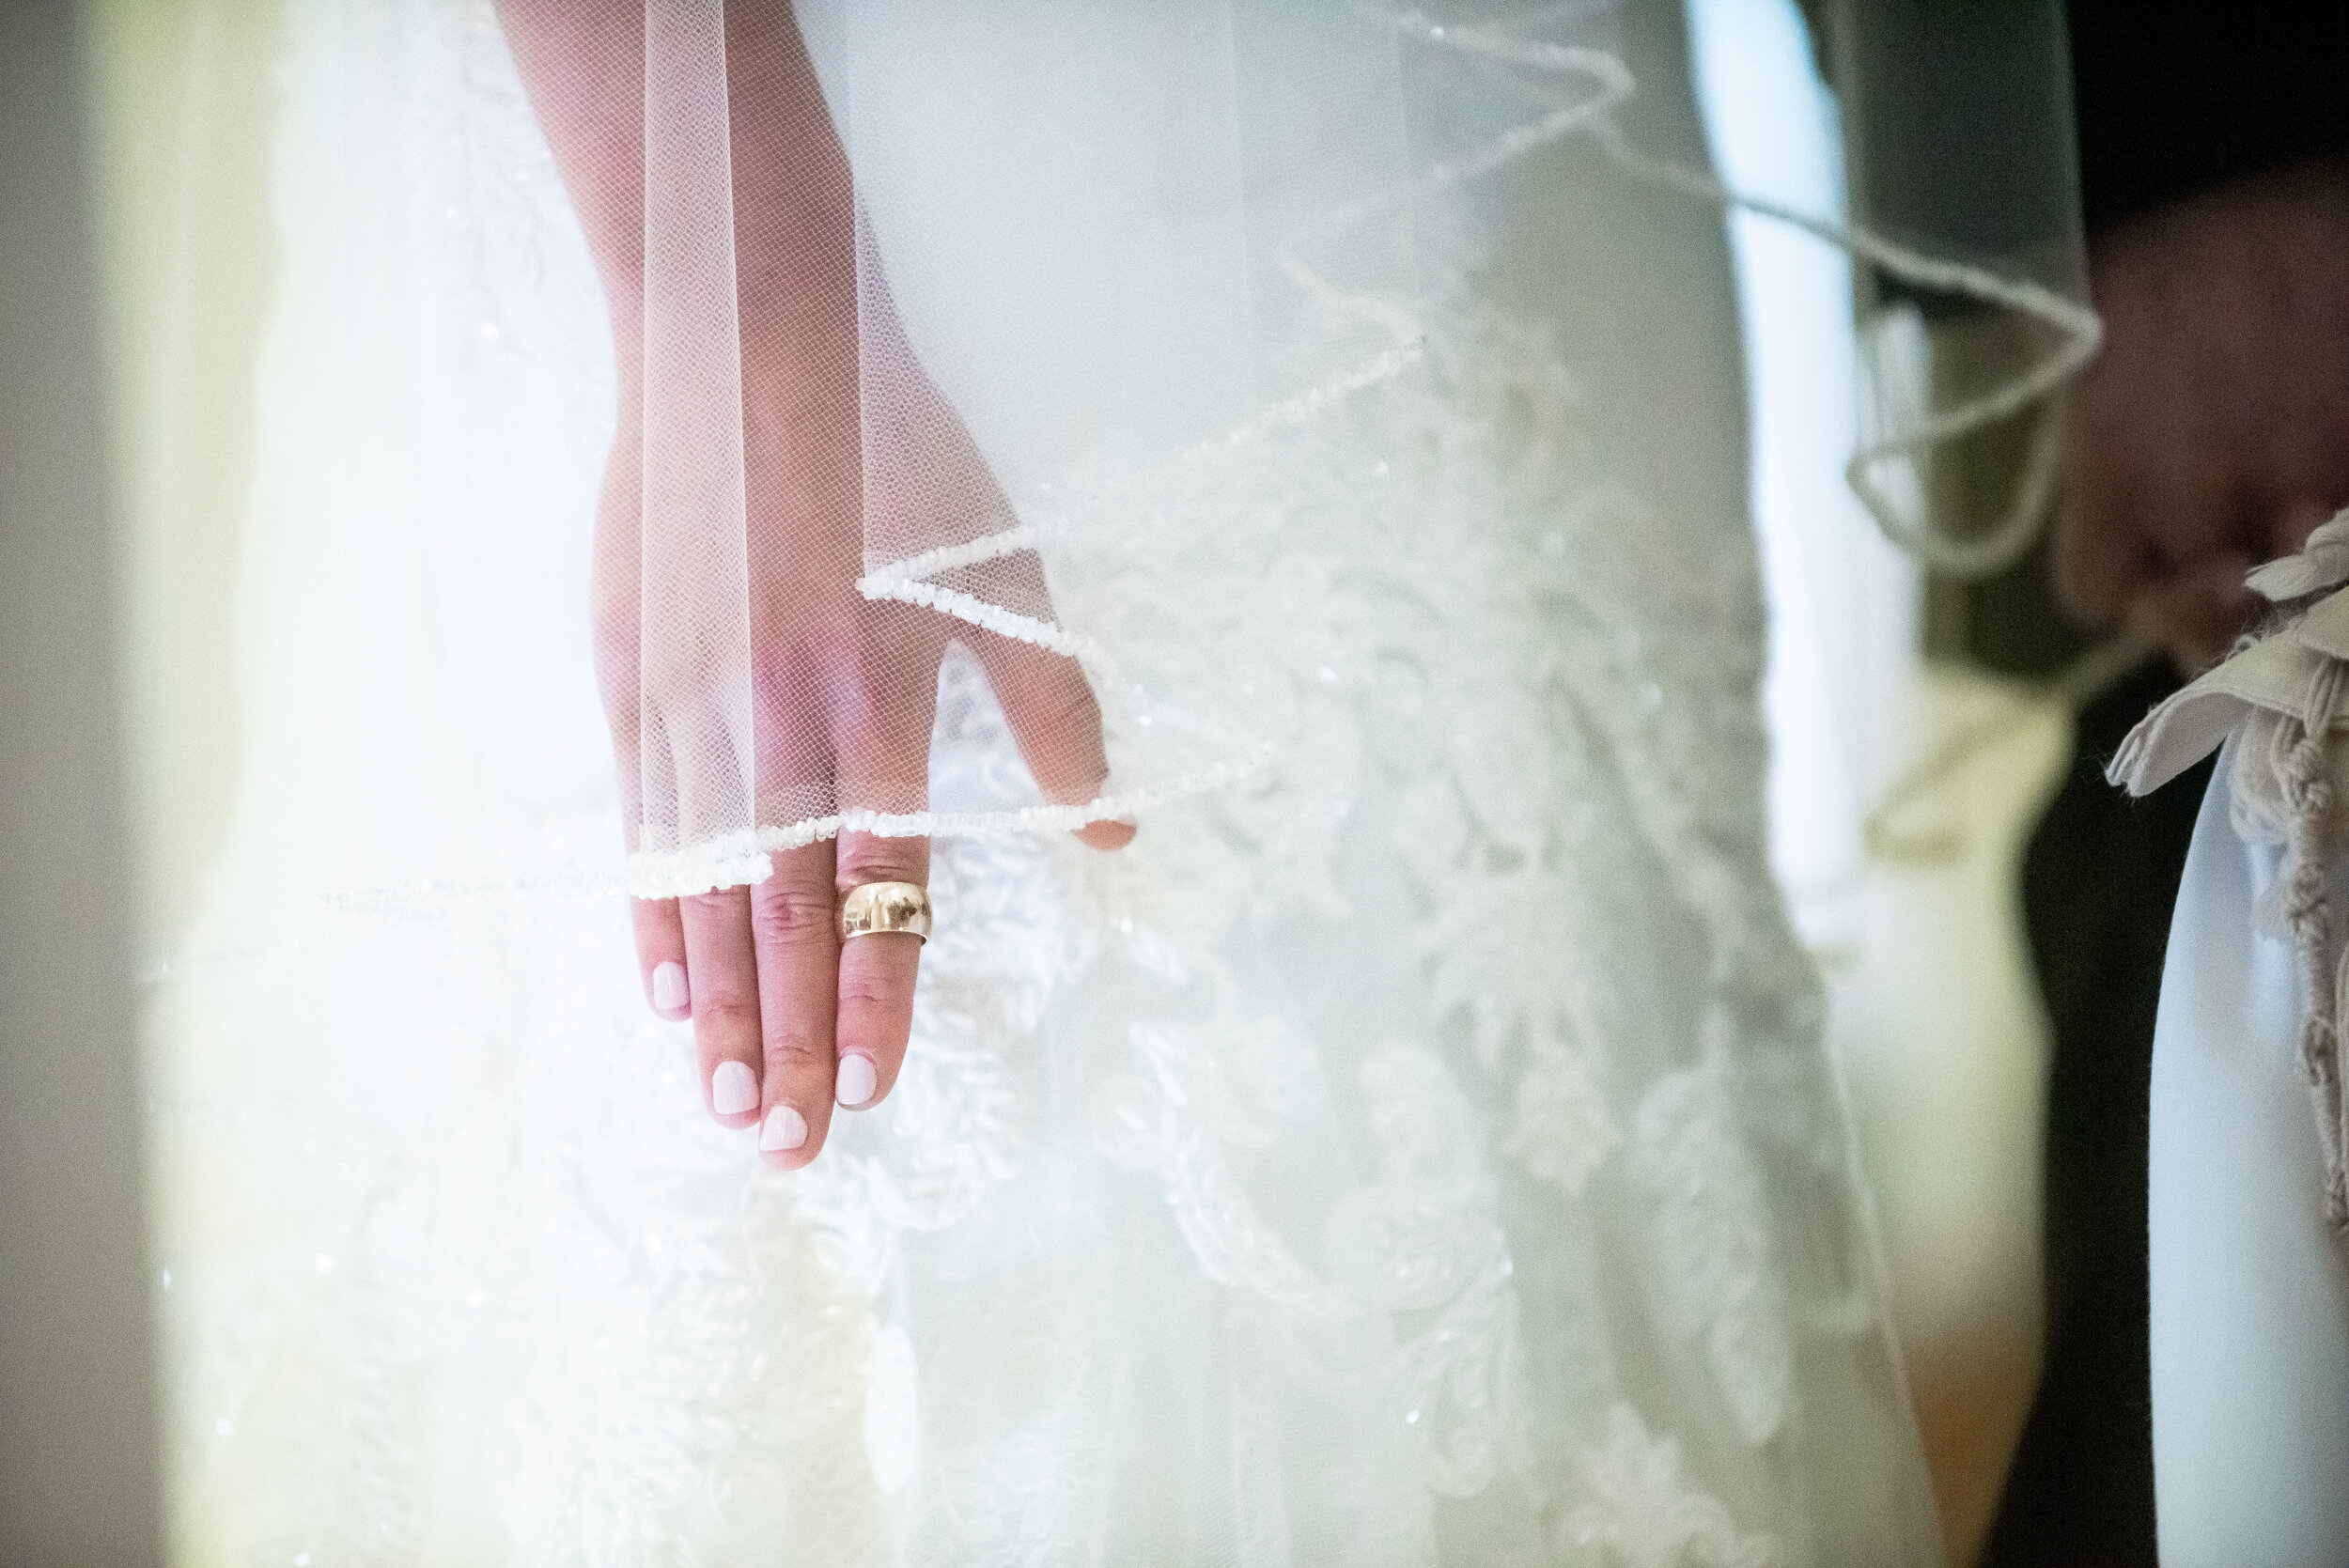 Lace wedding dress detail: Loews Chicago Hotel Wedding captured by J. Brown Photography